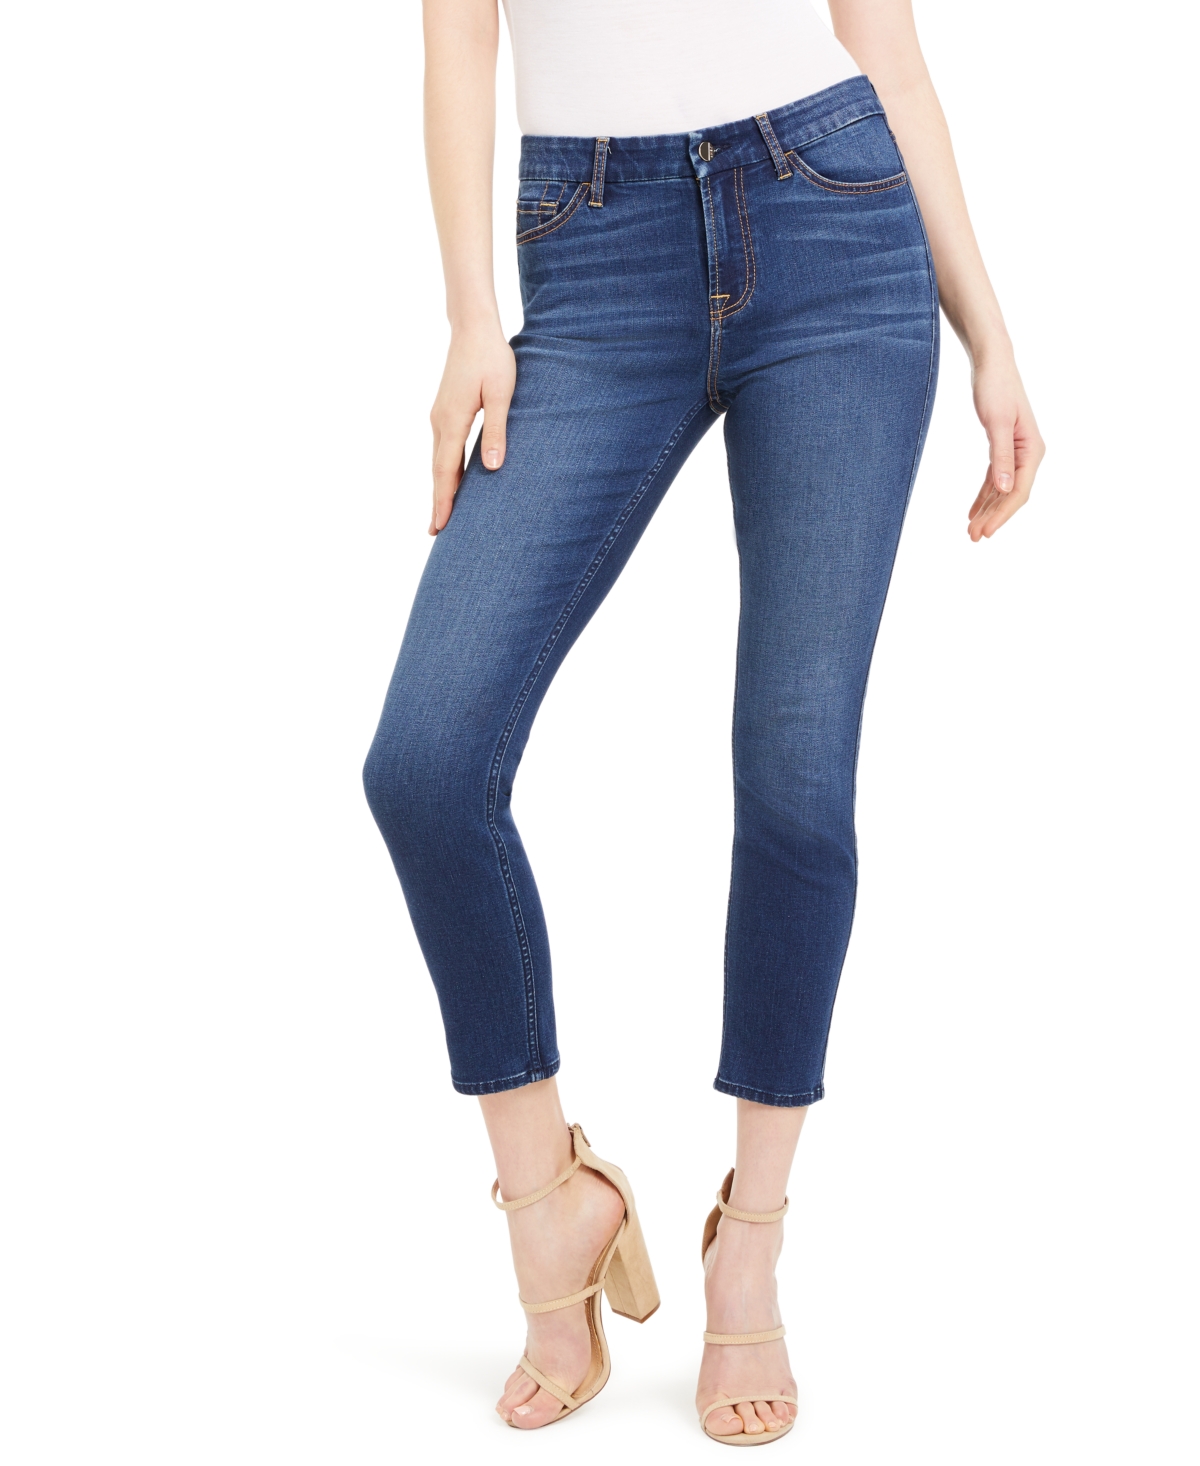 JEN7 by 7 For All Mankind Skinny Ankle Jeans